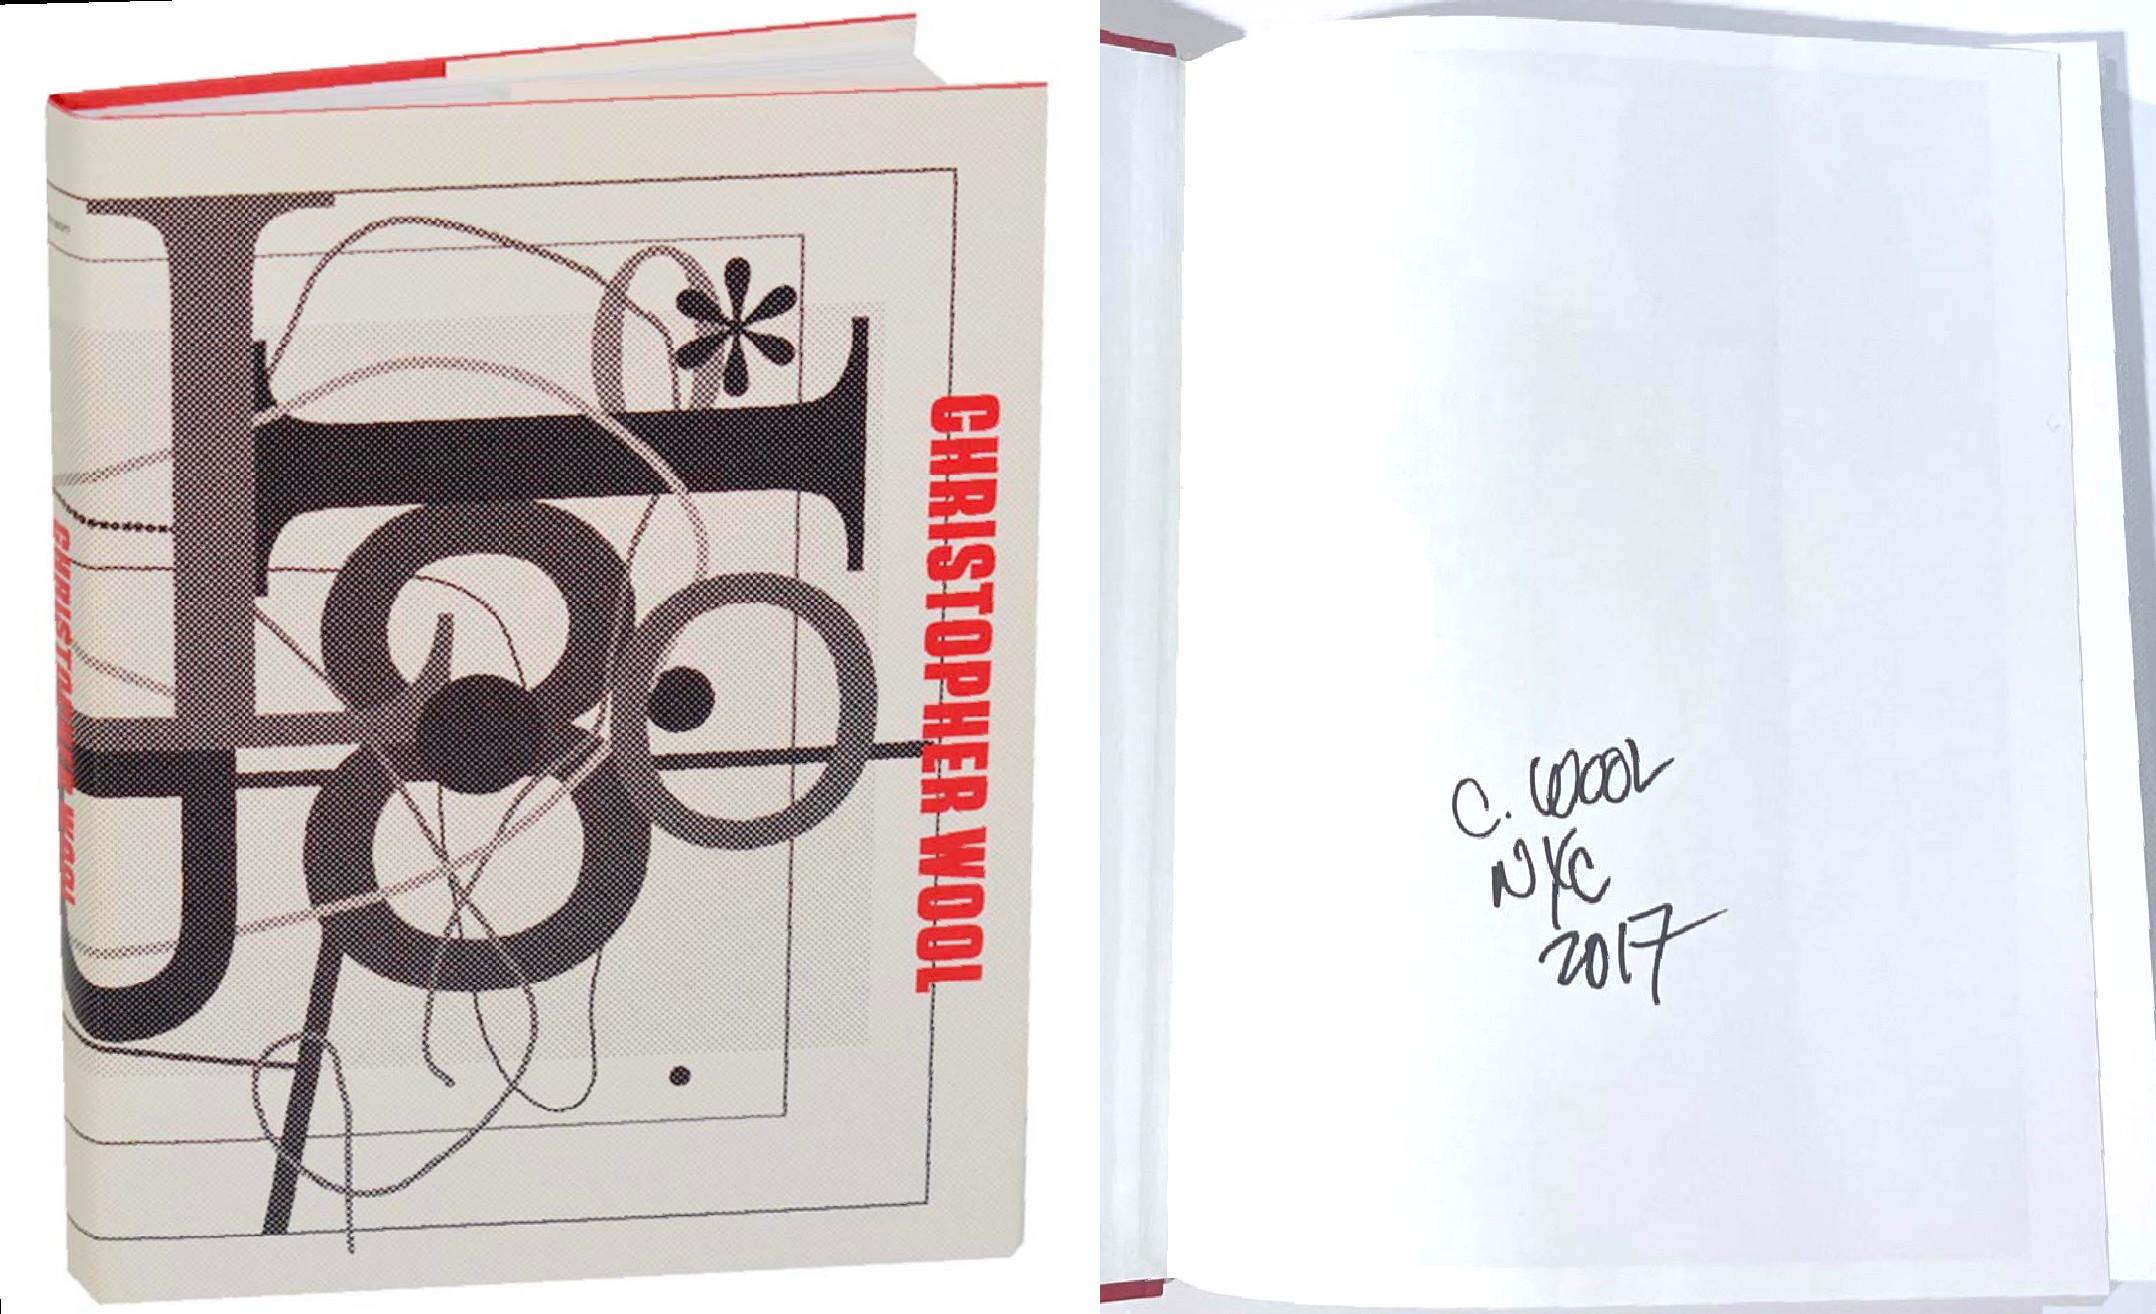 Christopher Wool Guggenheim Monograph, Hand signed and dated by Christopher Wool